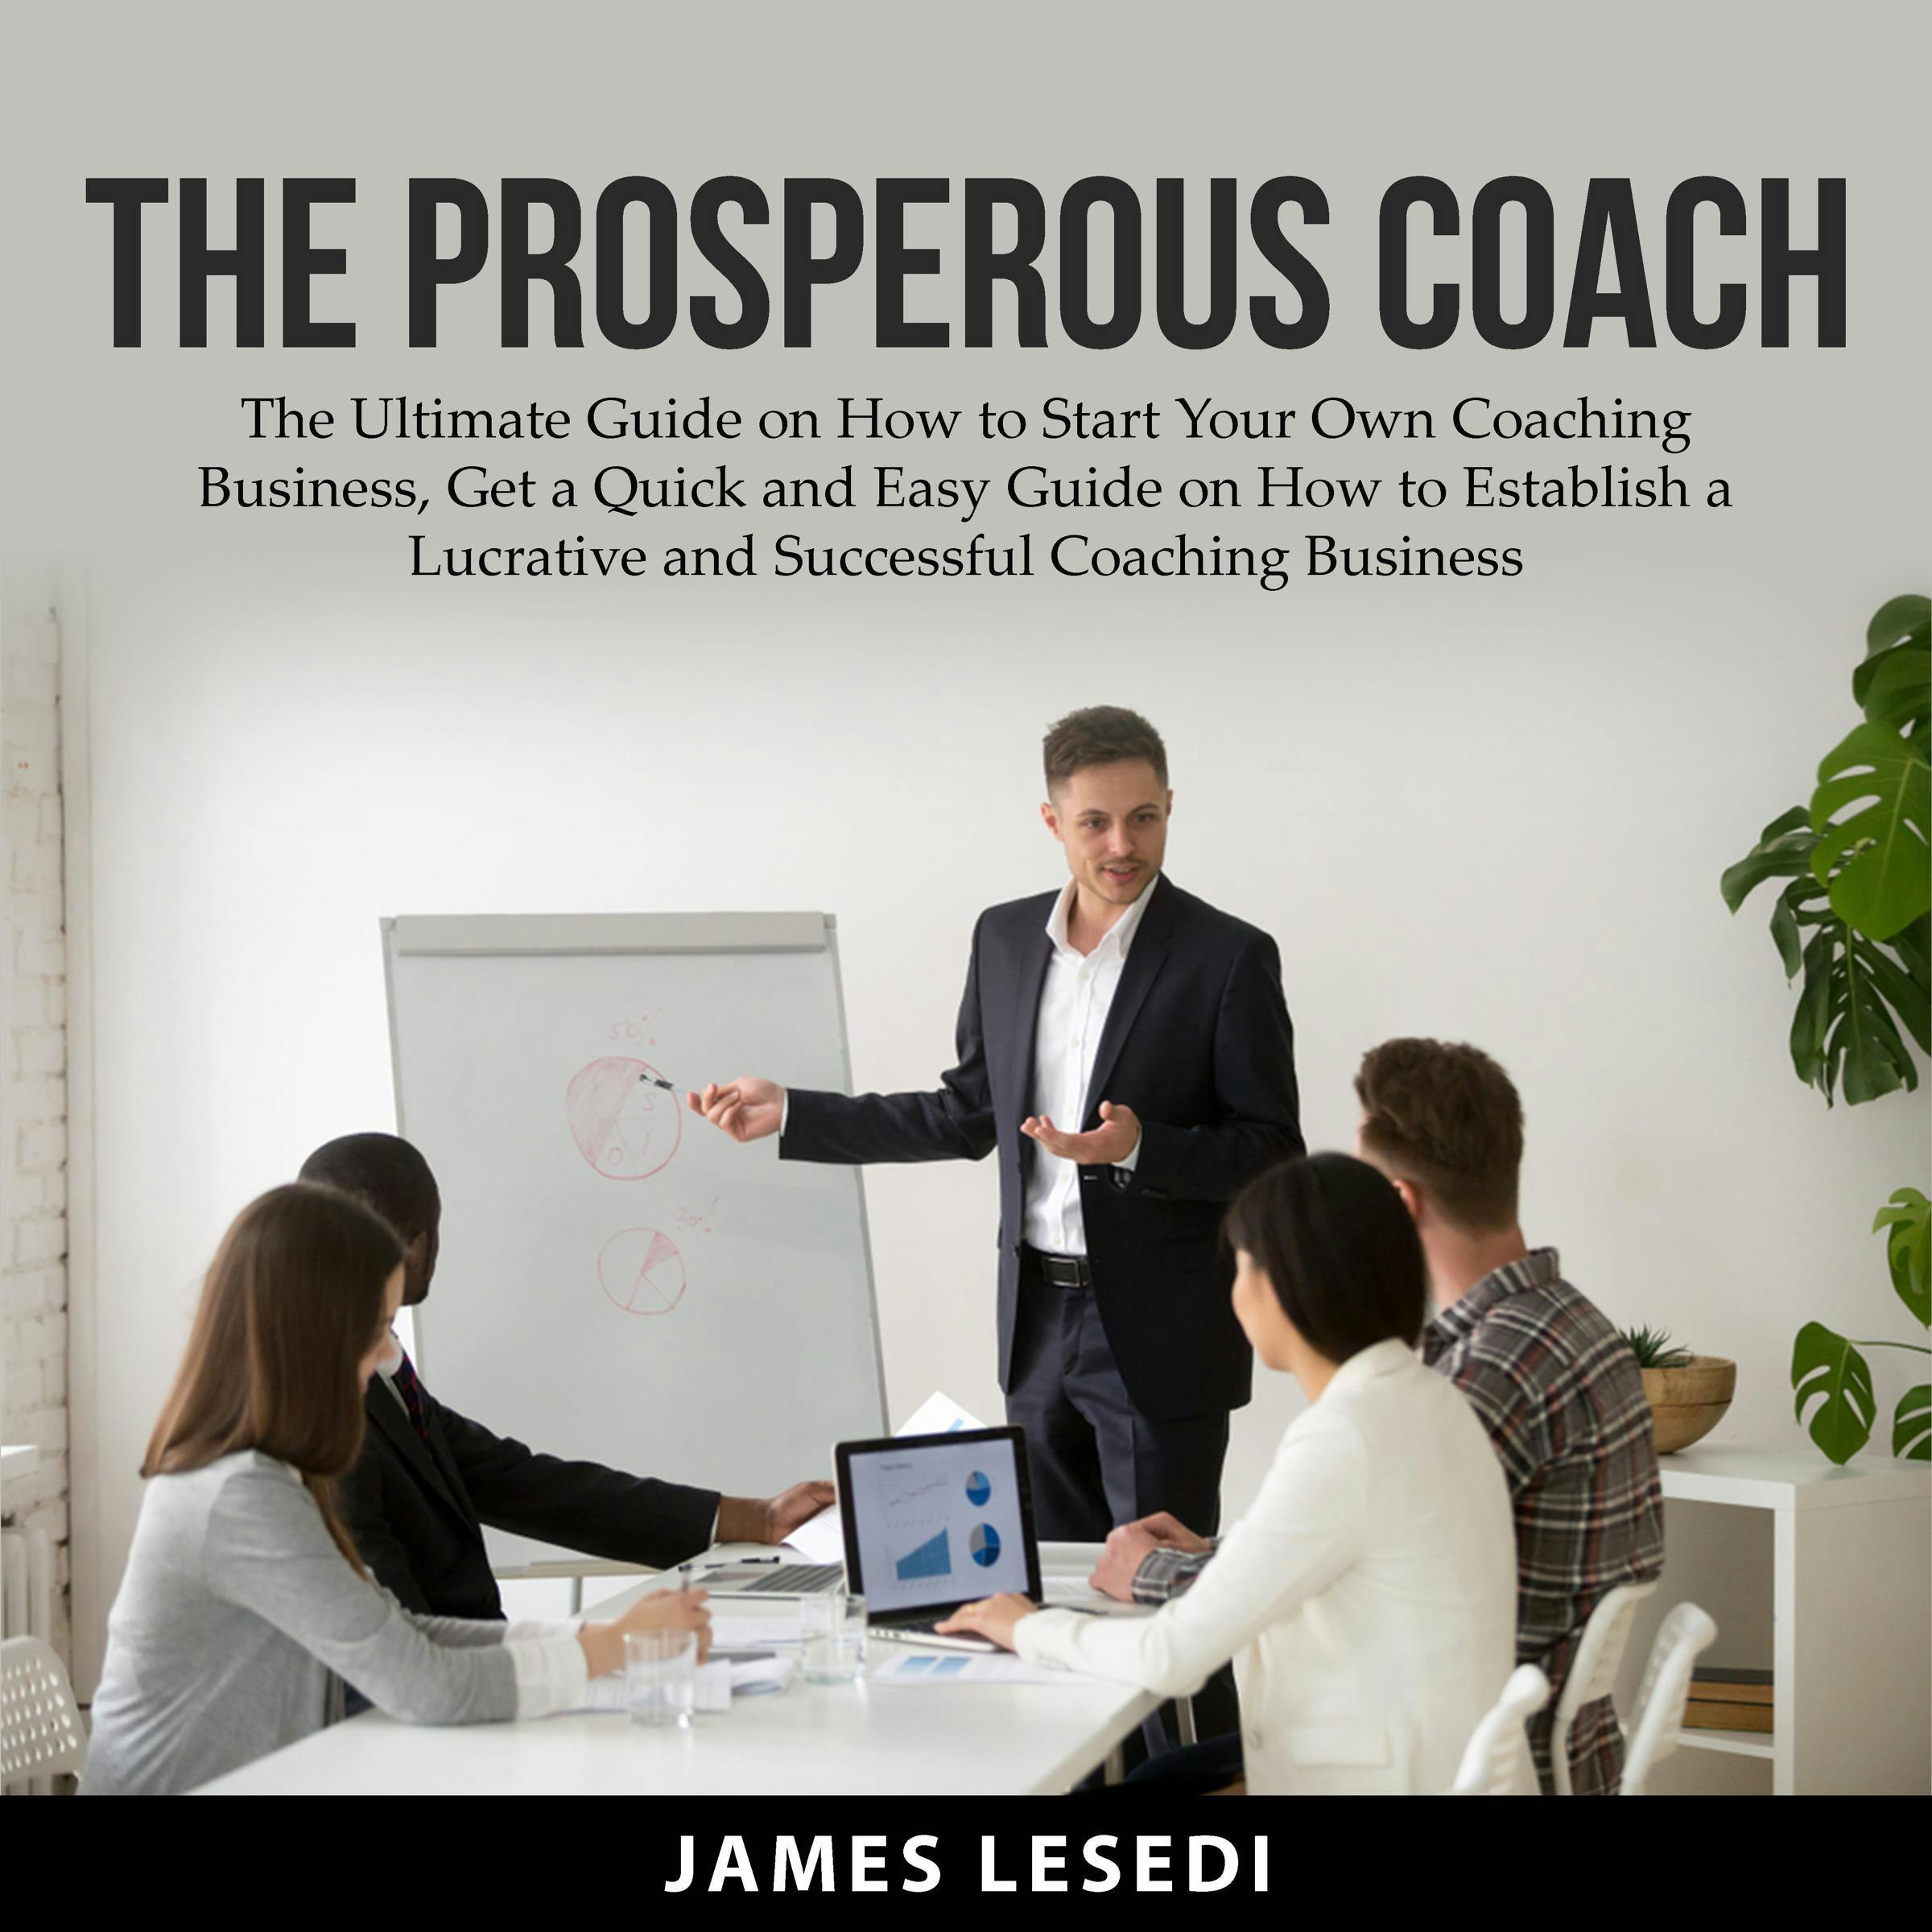 The Prosperous Coach: The Ultimate Guide on How to Start Your Own Coaching Business, Get a Quick and Easy Guide on How to Establish a Lucrative and Successful Coaching Business - undefined